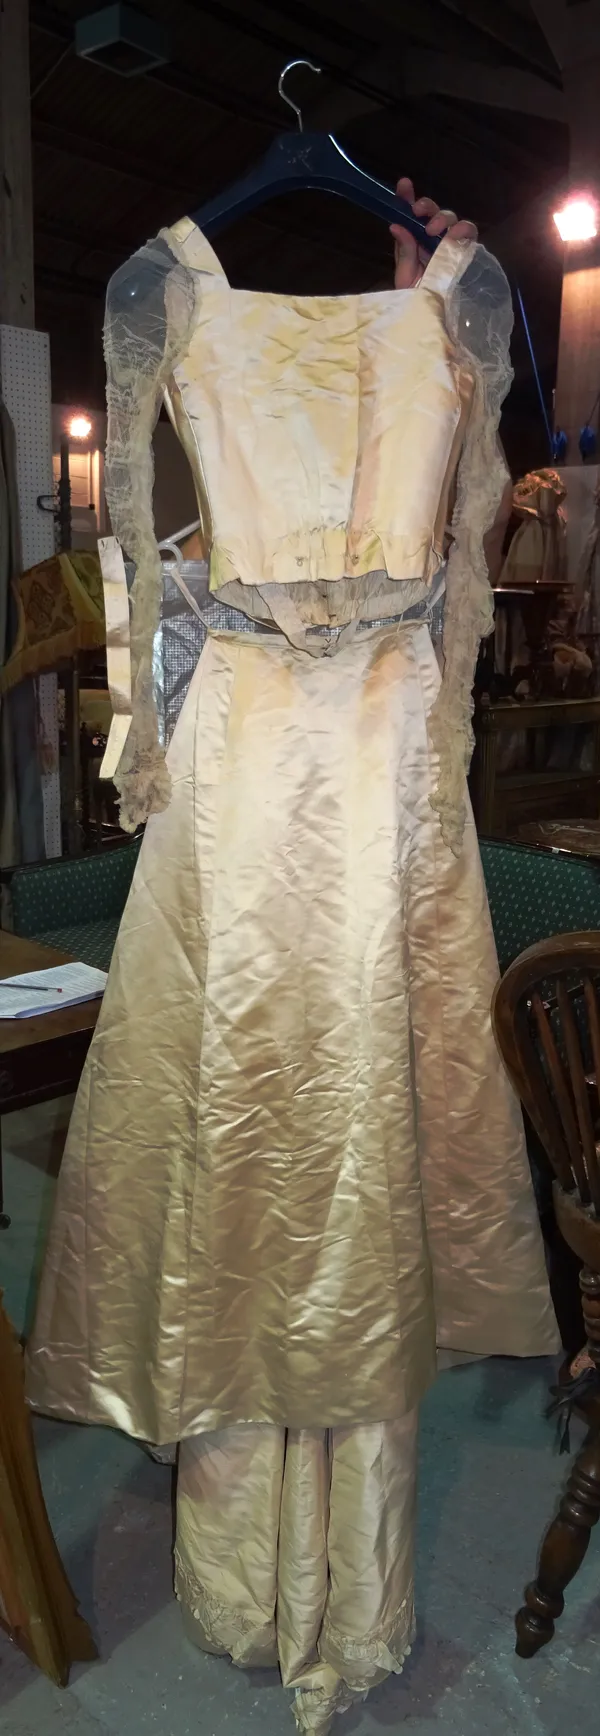 An Edwardian two piece wedding dress, comprising a cream silk long skirt with train, a bodice top with lace long sleeves, gloves, stockings and extra